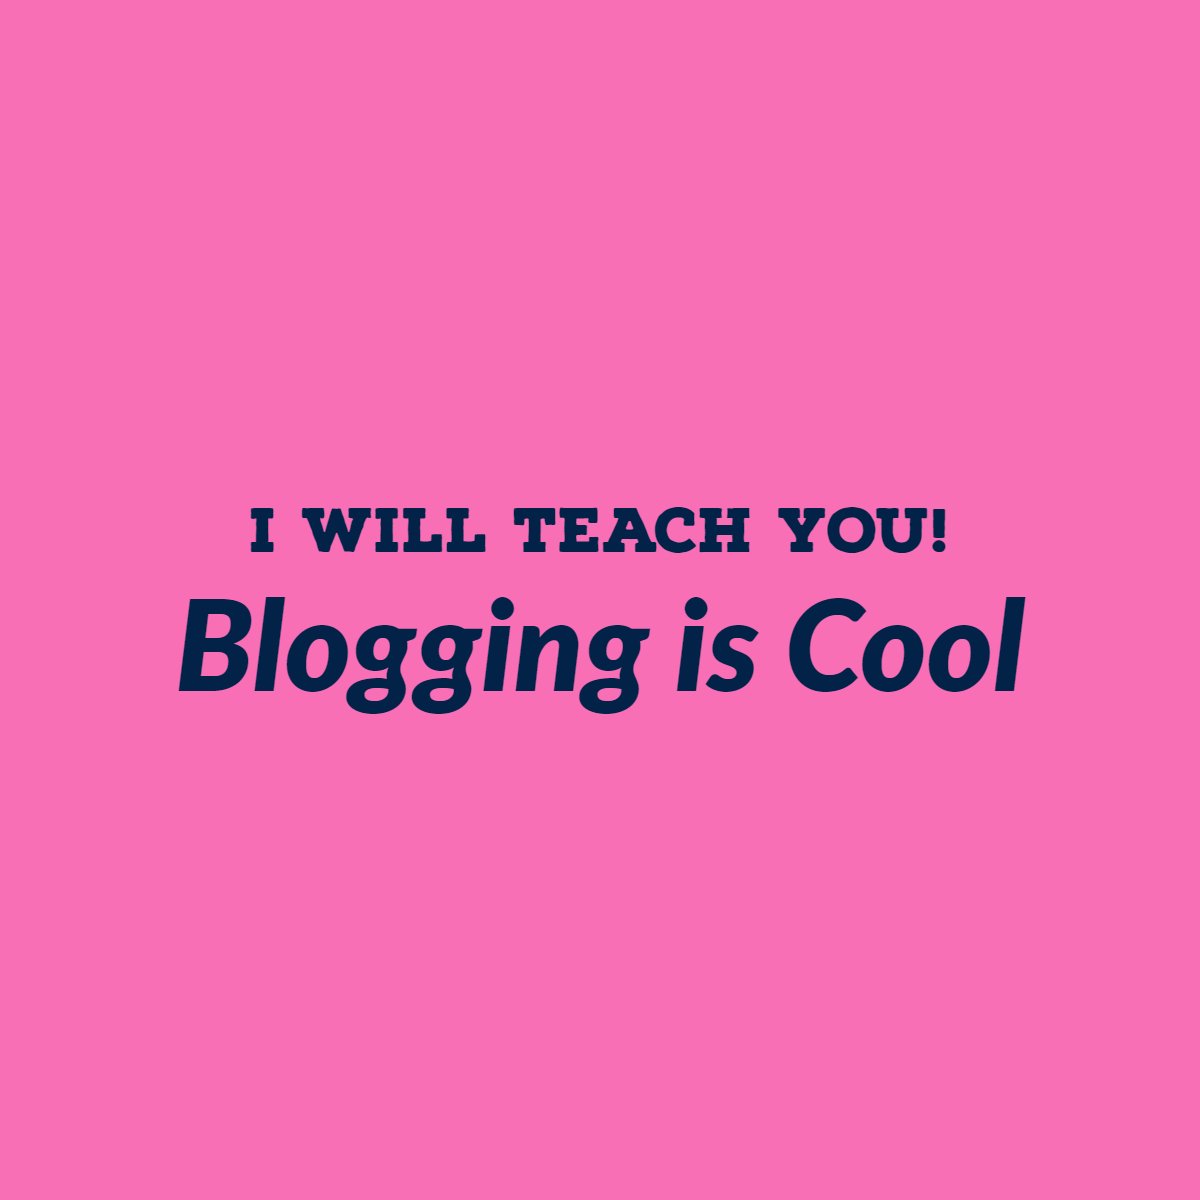 bloggingiscool.com write for humans not search engines